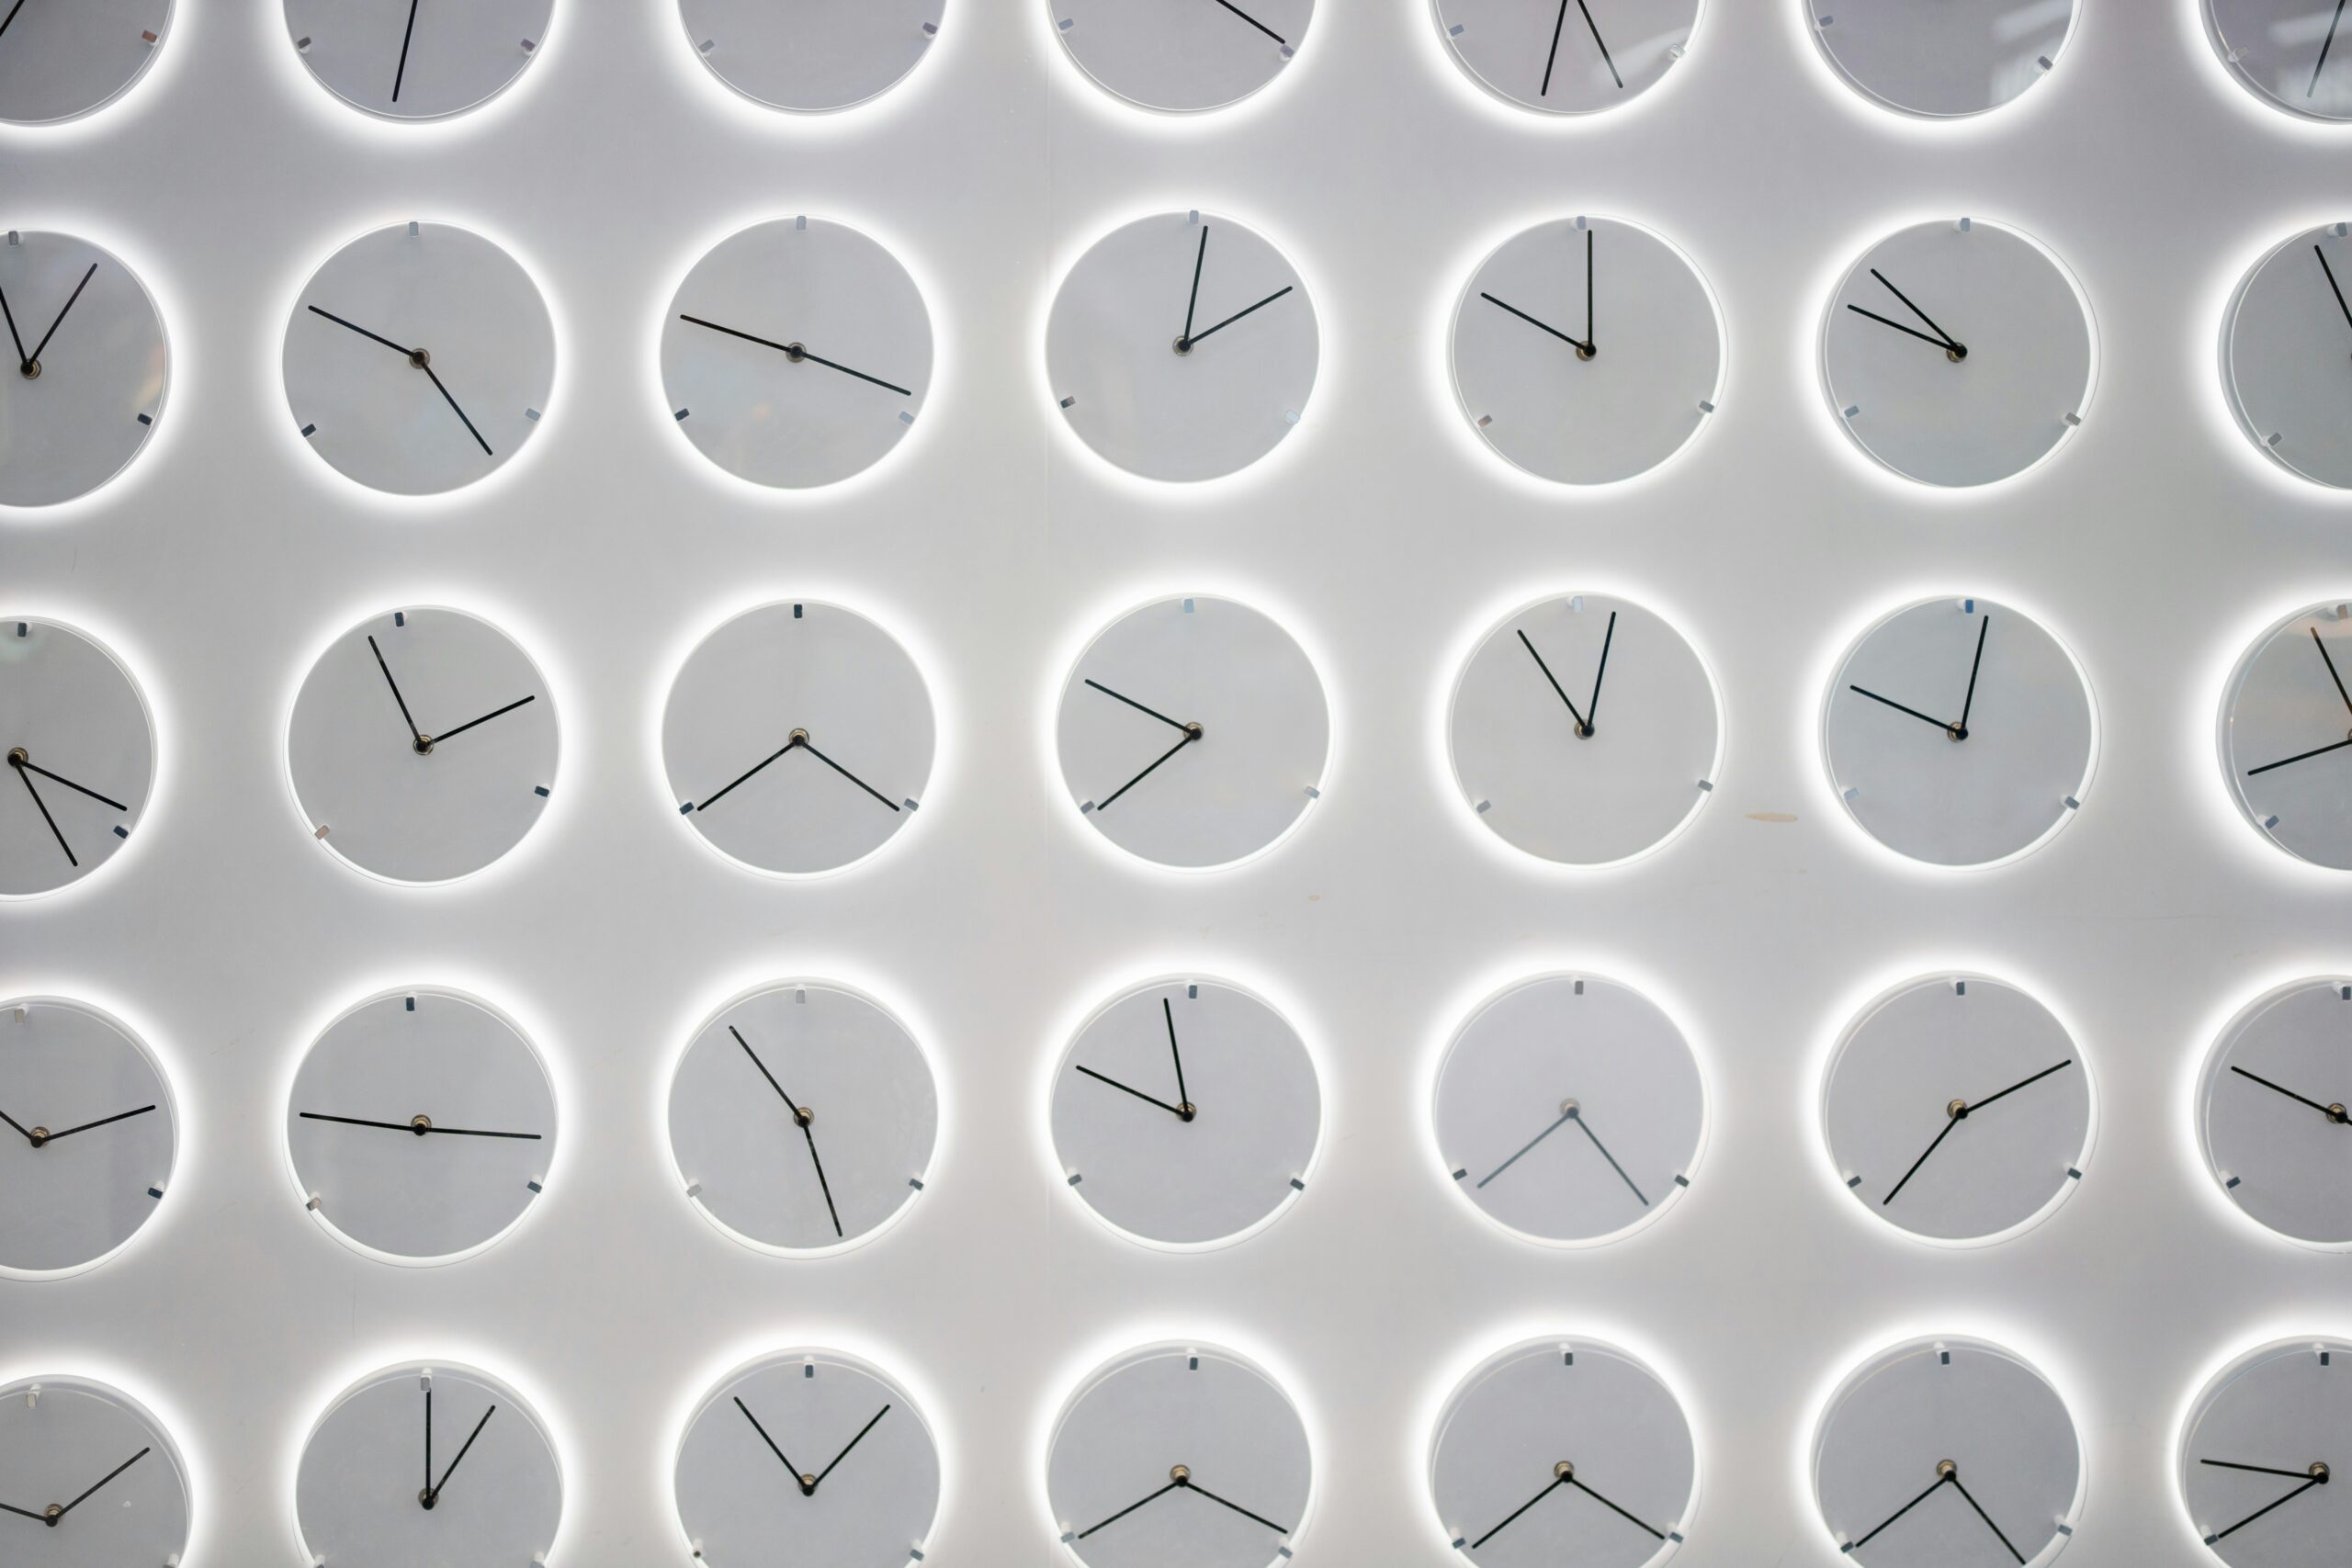 A white wall with a variety of white clocks hung up on it, all showing different times.